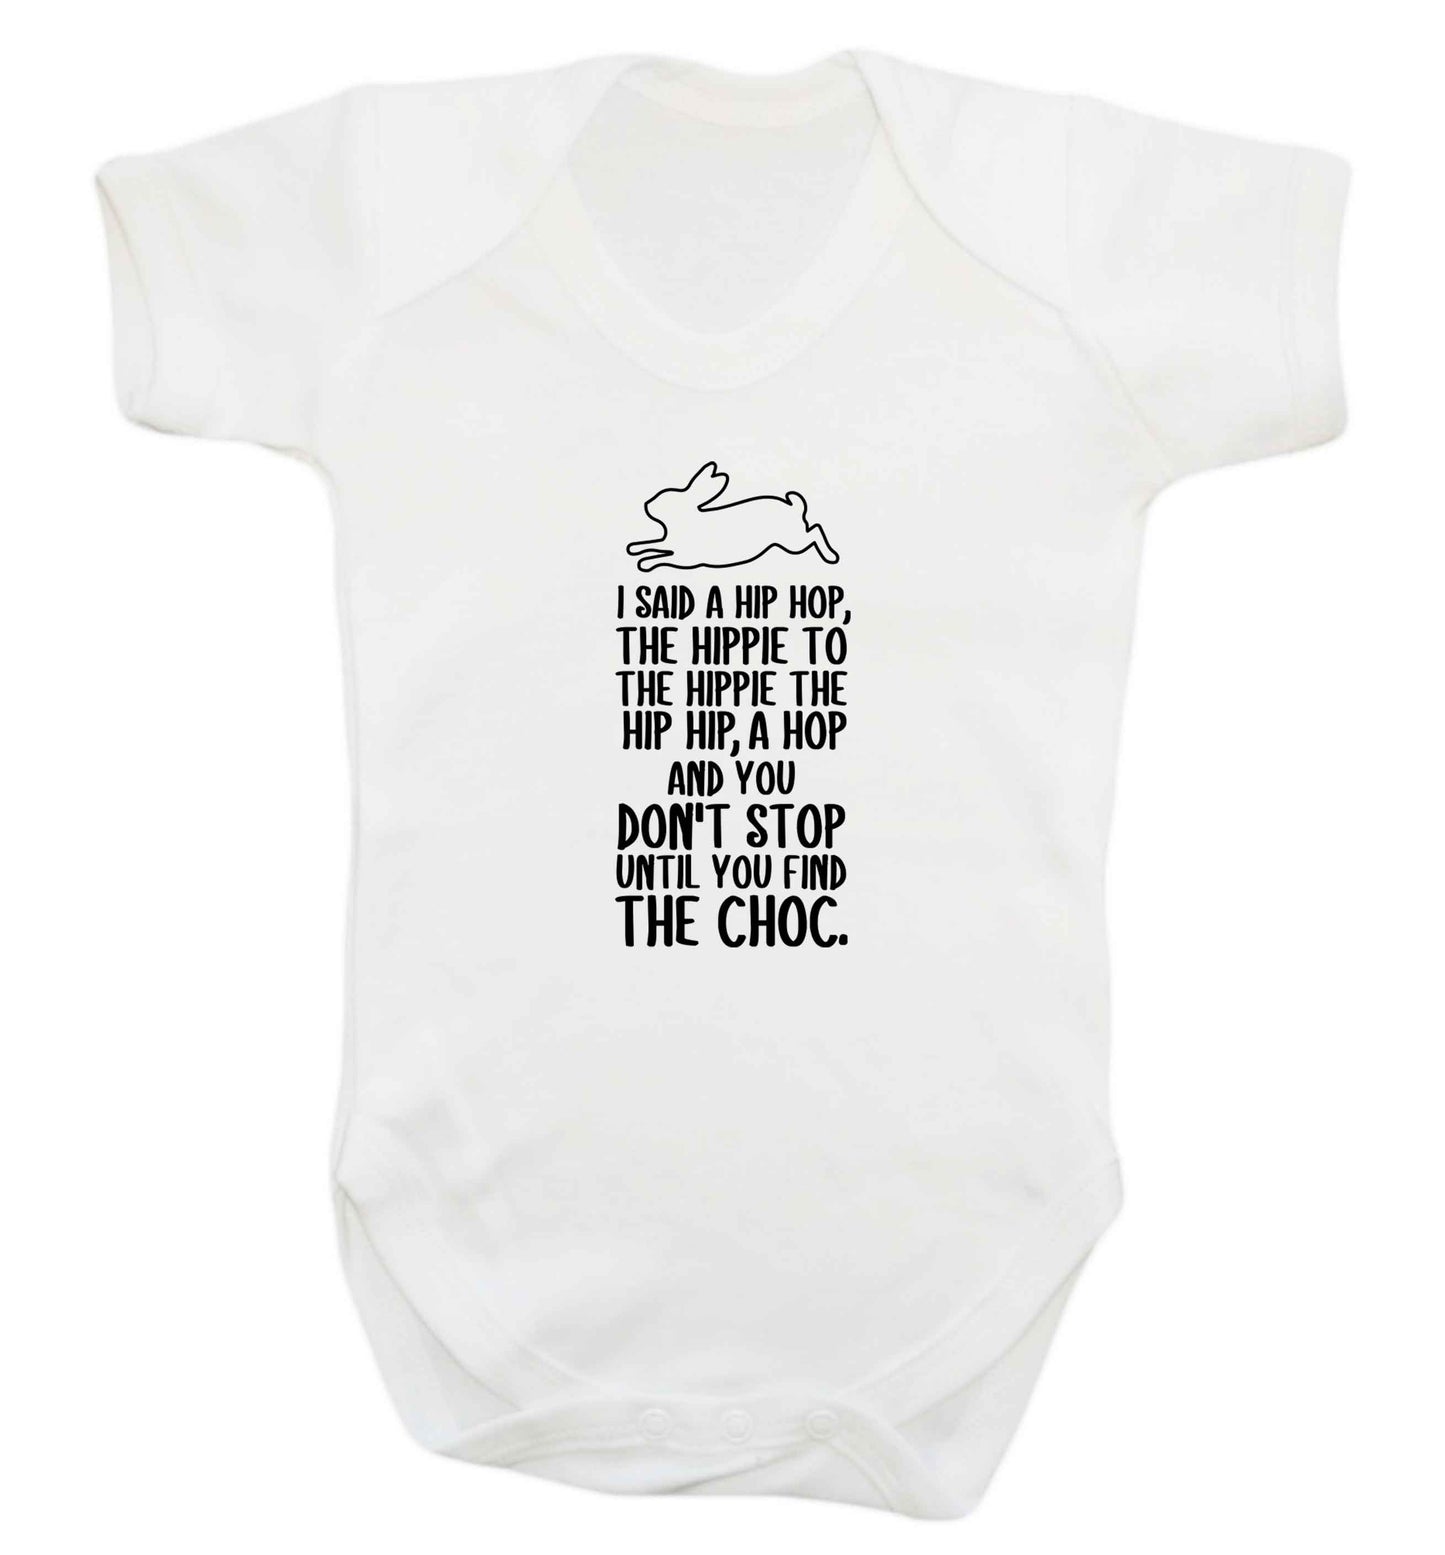 Don't stop until you find the choc baby vest white 18-24 months